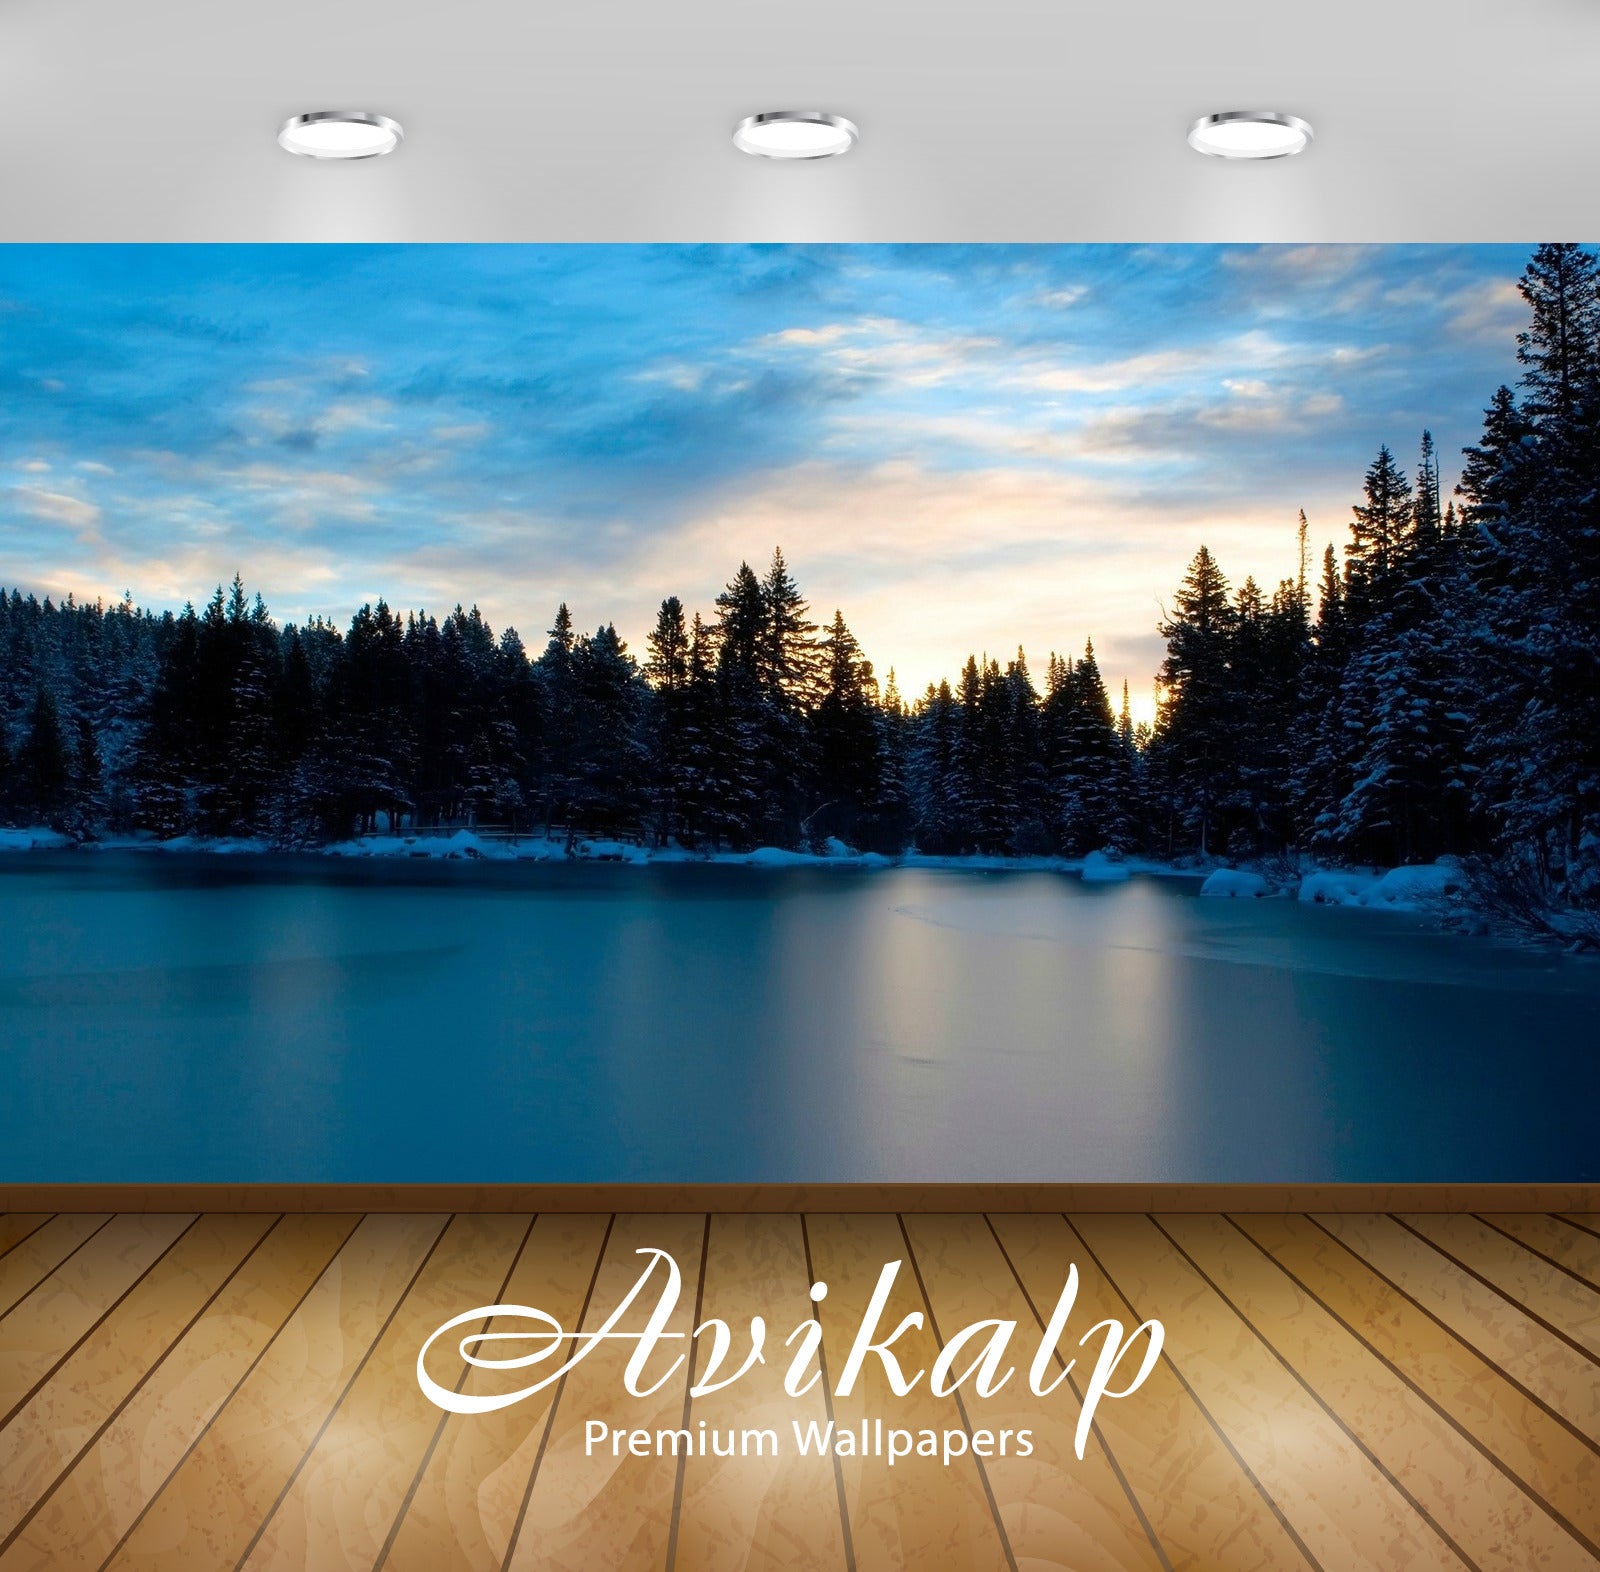 Avikalp Exclusive Awi1932 Frozen Lake Full HD Wallpapers for Living room, Hall, Kids Room, Kitchen,